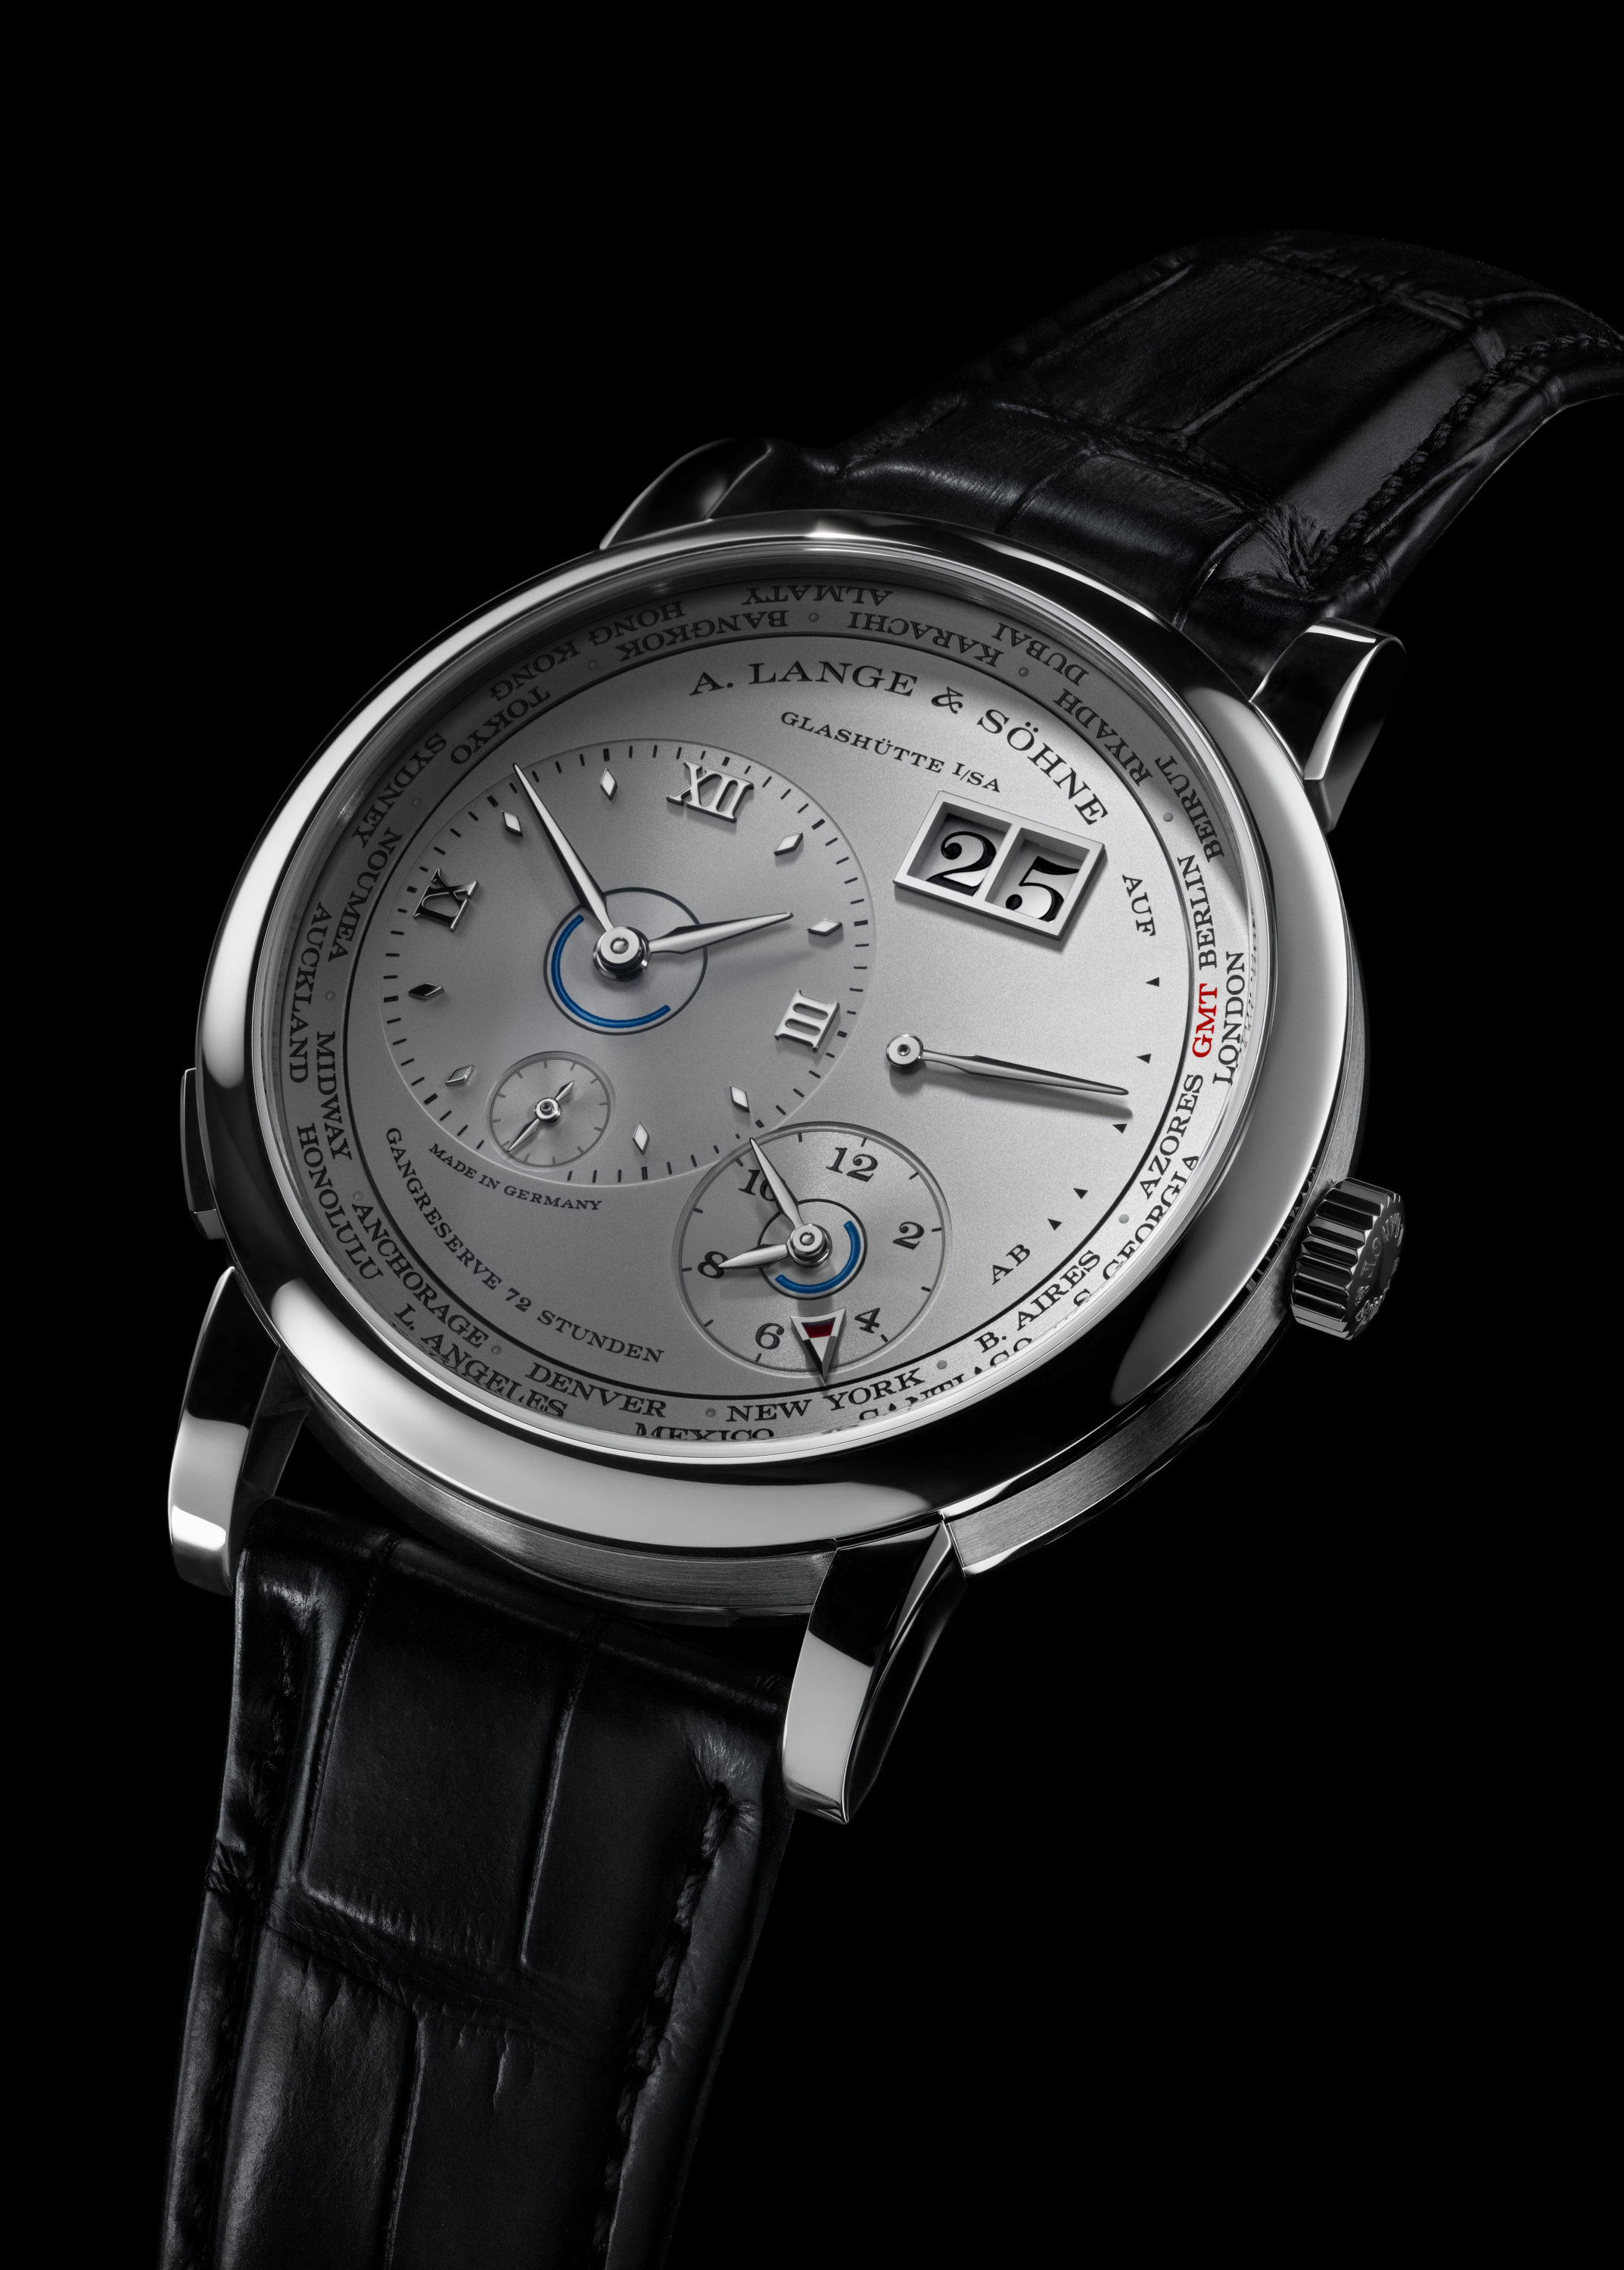 Monochromatic Magnificence: A. Lange & Söhne Releases Lange 1 Time Zone in Platinum